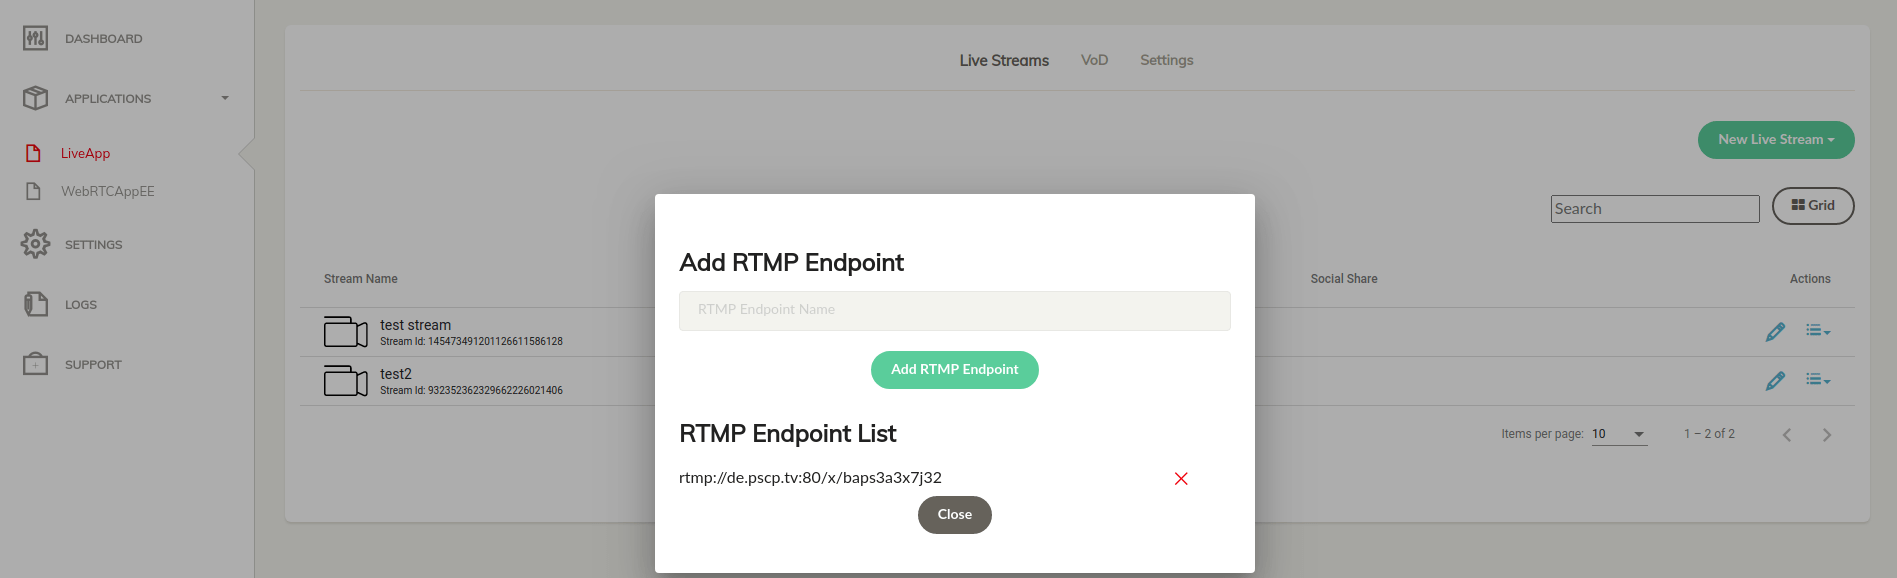 ant-media-dashboard-add-periscope-rtmp-endpoint